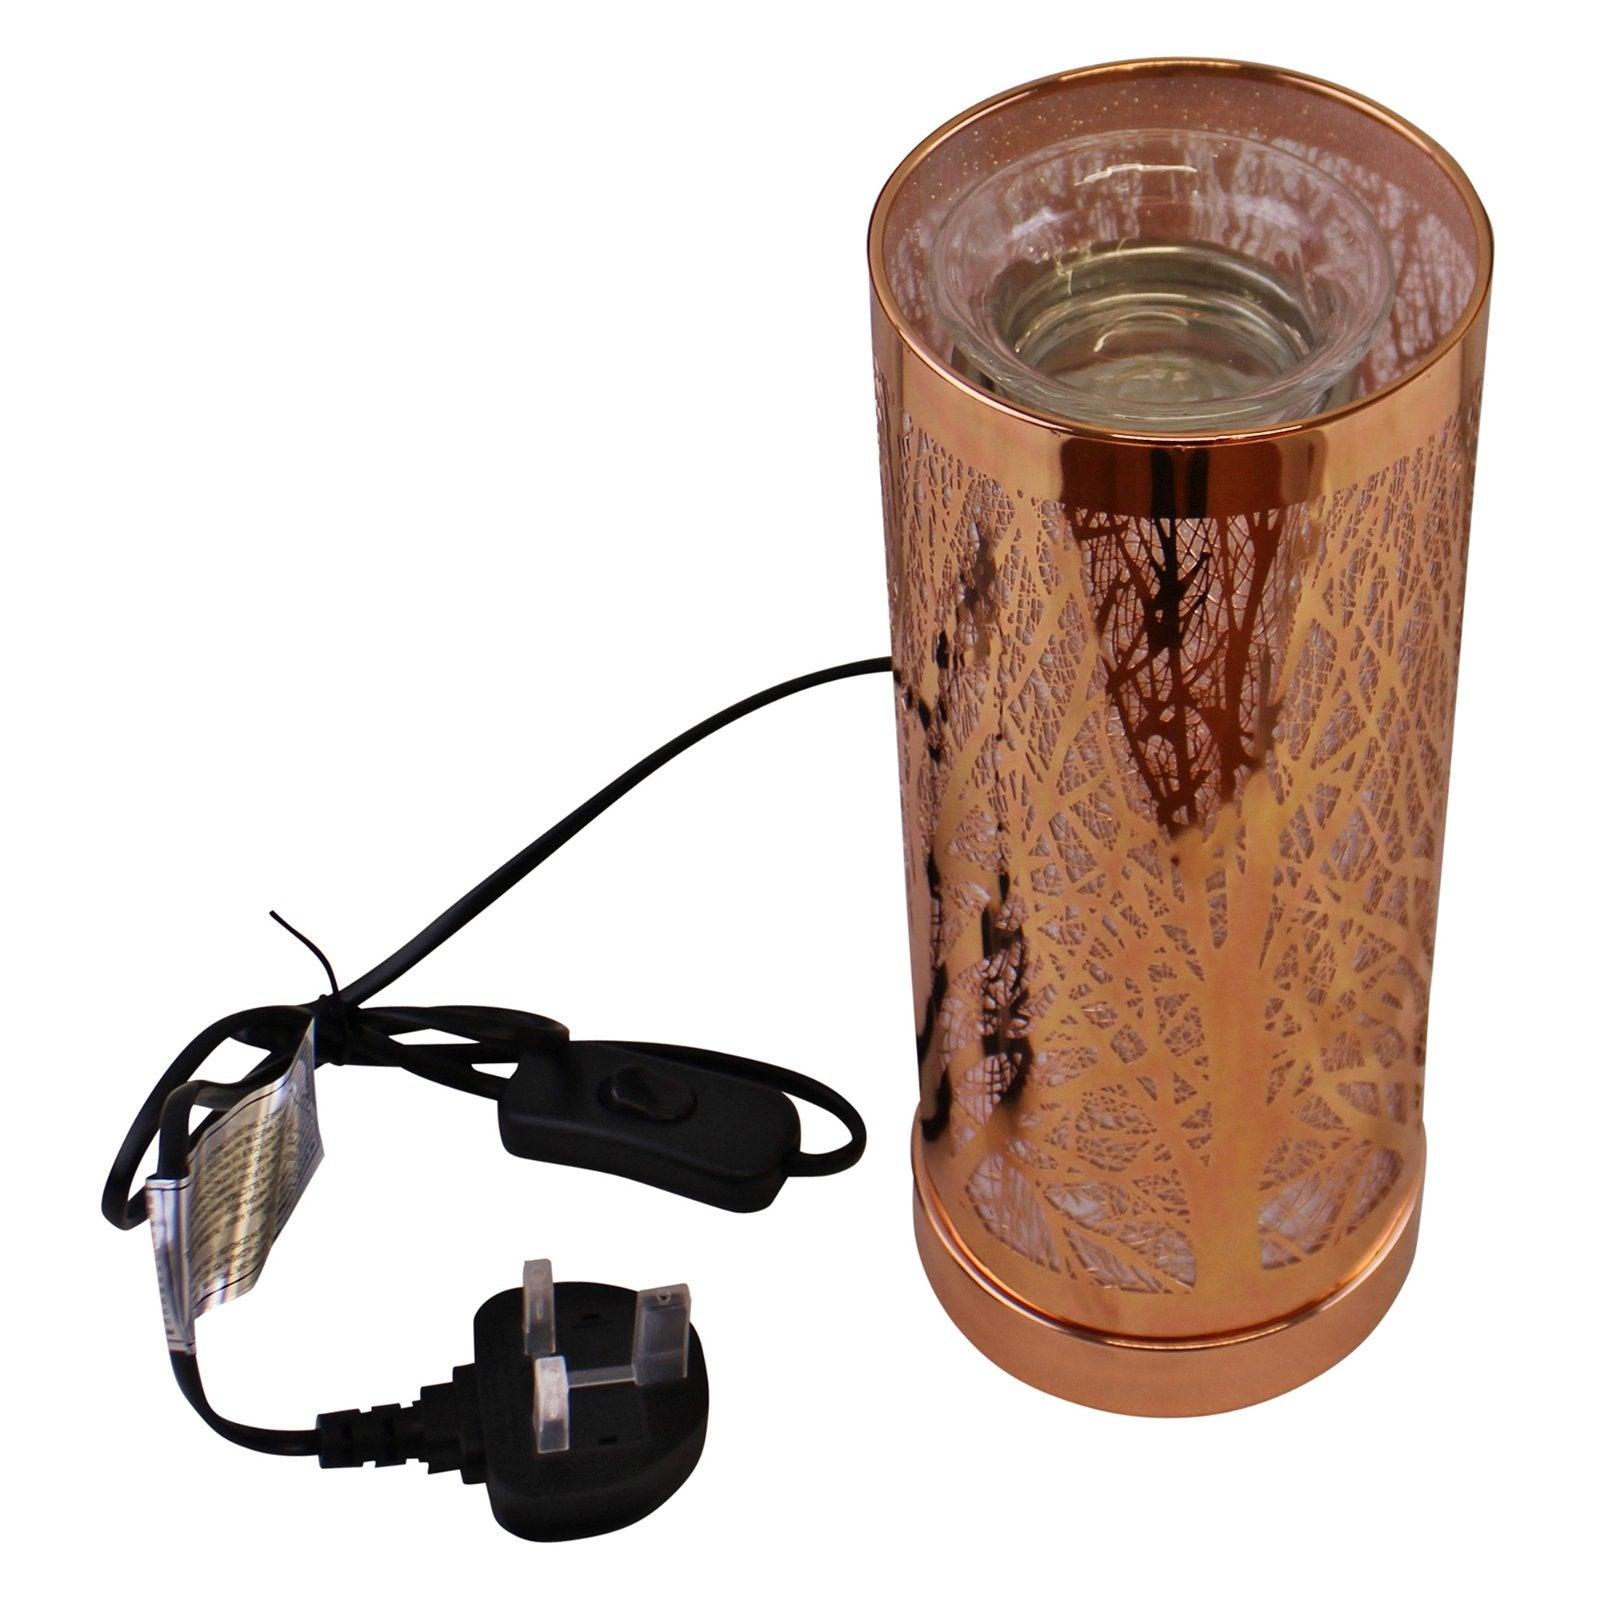 View Woodland Design Colour Changing LED Lamp Aroma Diffuser in Rose Gold information